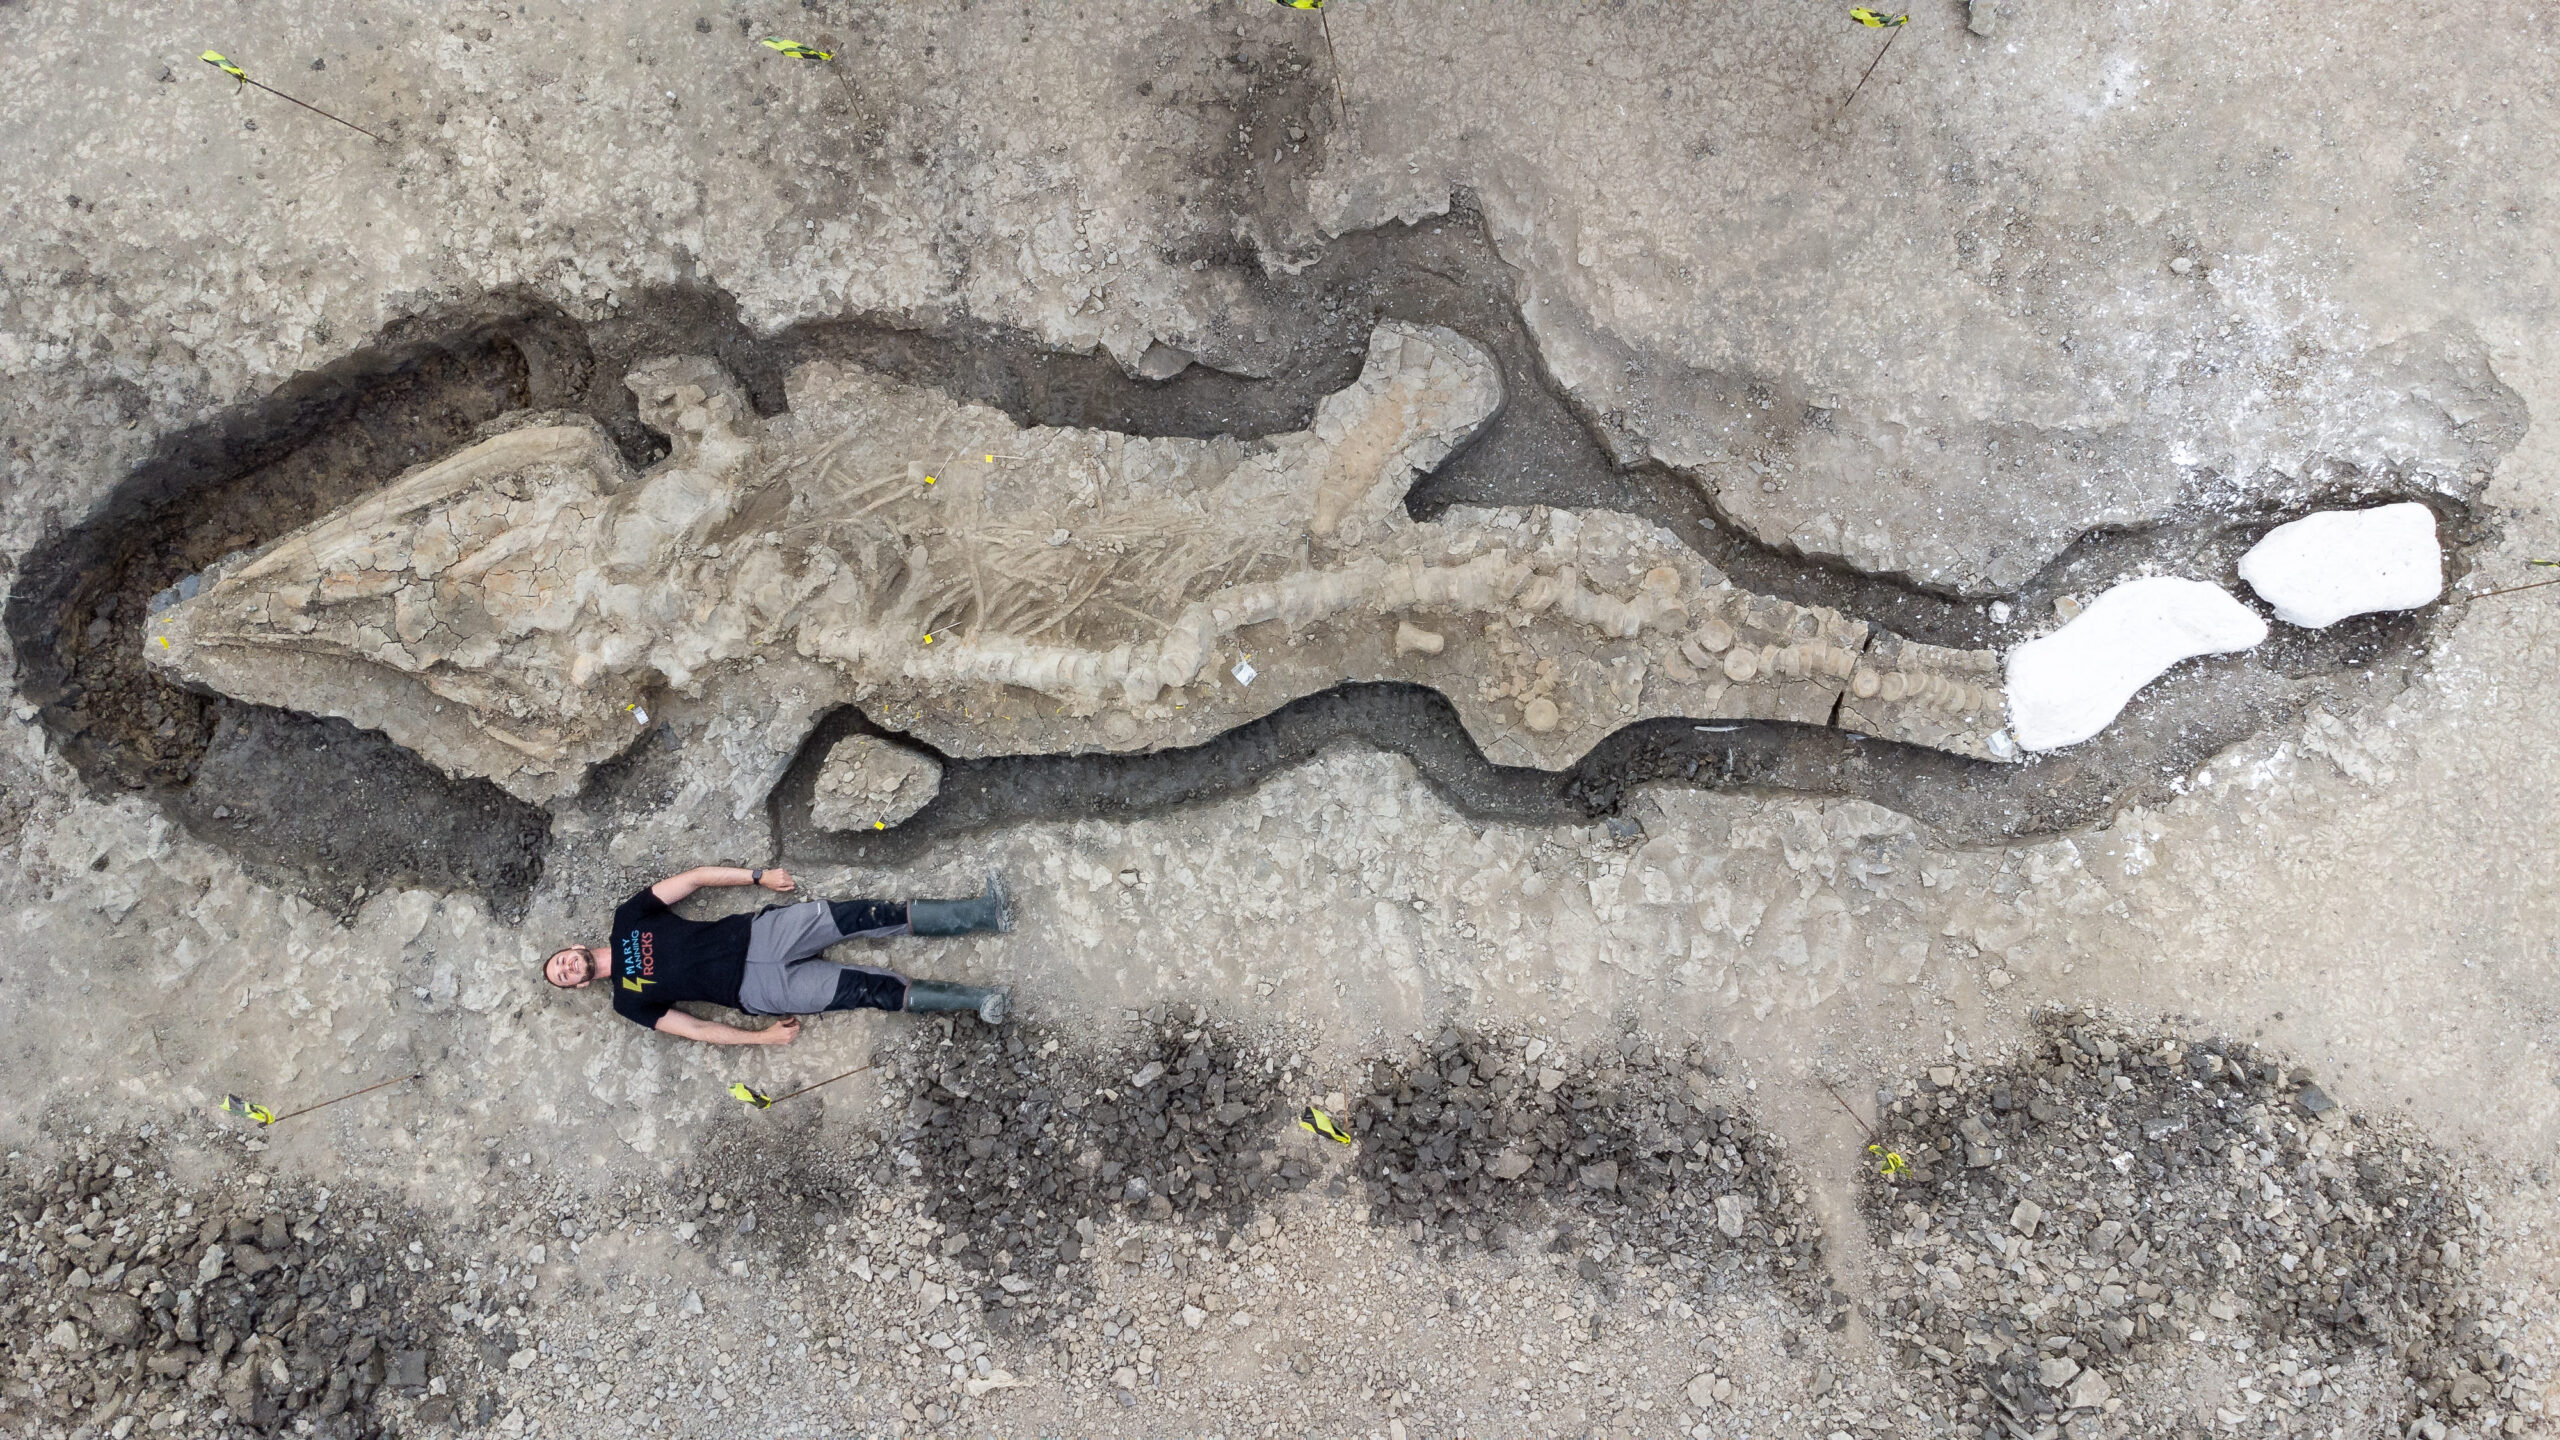 image: man lays next to largest "sea dragon" fossil discovered.